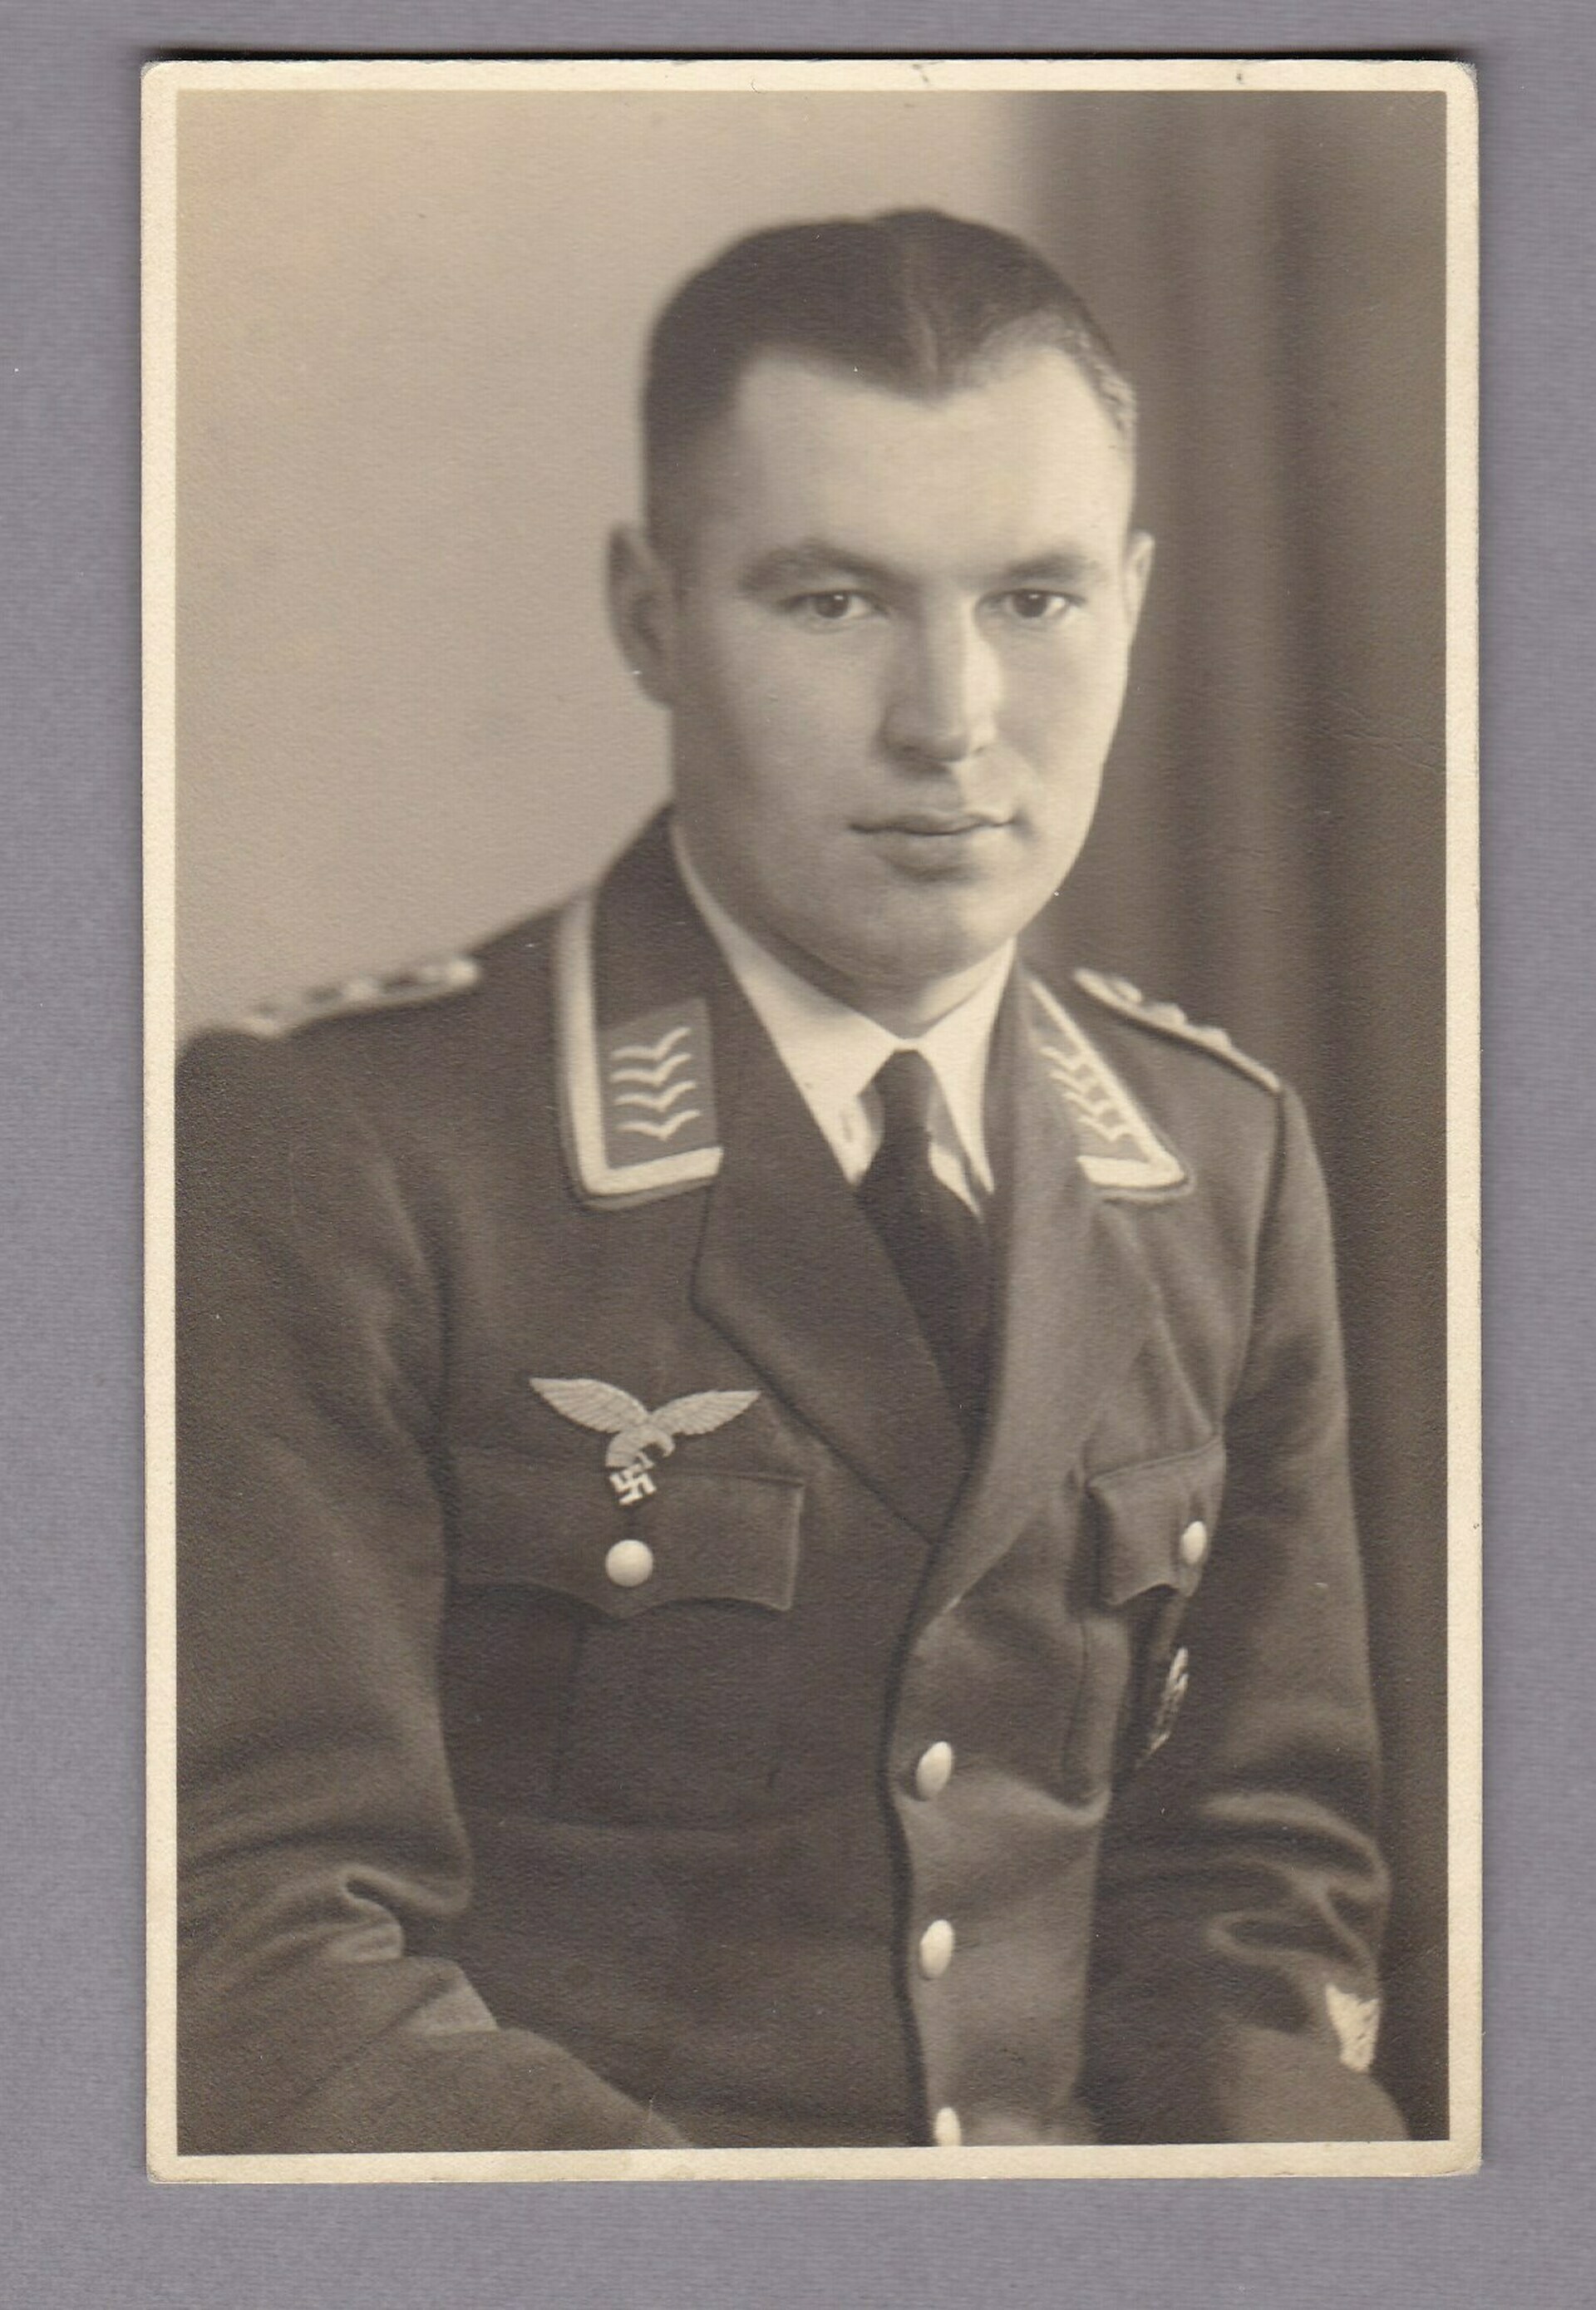 Early Portrait of a Luftwaffe NCO